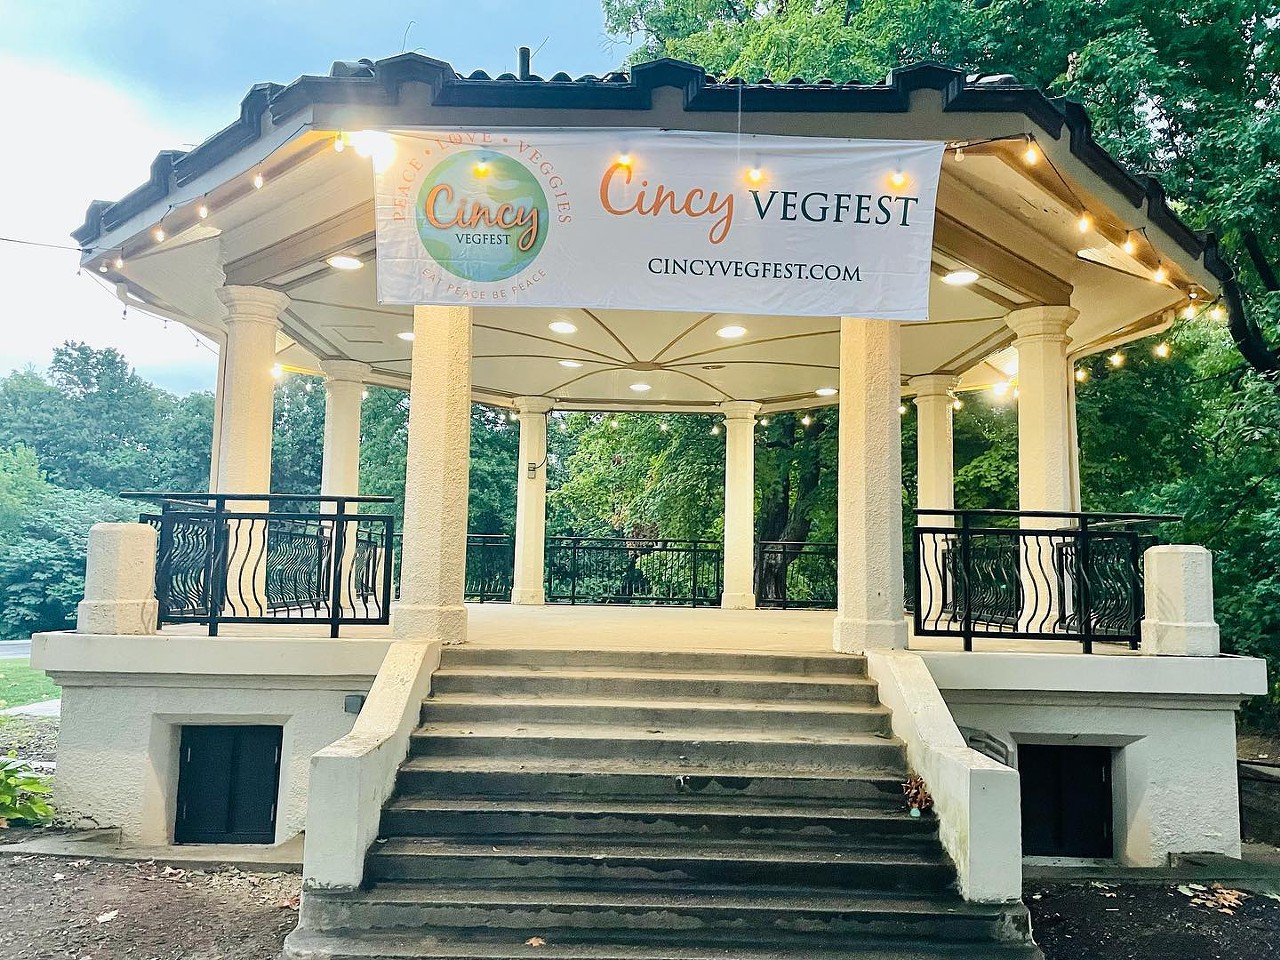 Cincy VegFest + Vegan Chili Cook-Off
Noon-6:00 p.m. June 10
Calling all herbivores: The fifth-annual Cincy VegFest is back, along with a Vegan Chili Cook-off. Enjoy a day of groovy live music, a pre-event yoga session, and plant-based food to munch on. This event will be held at Burnet Woods Bandstand from noon-6 p.m., with yoga sessions starting at 10 a.m. and 11 a.m. Plant-sourced meal options will be prepared and provided by a variety of vendors, including Essen Kitchen, Foodies Vegan, Like Mom’s Only Vegan and more. The vegan chili cook-off is calling anyone from home-kitchen gurus to amateur chefs to join the competition. Admission is free.
Noon-6 p.m. June 10. Burnet Woods Bandstand, 3298 Clifton Ave., Clifton, heärt.com/cincy-vegfest.